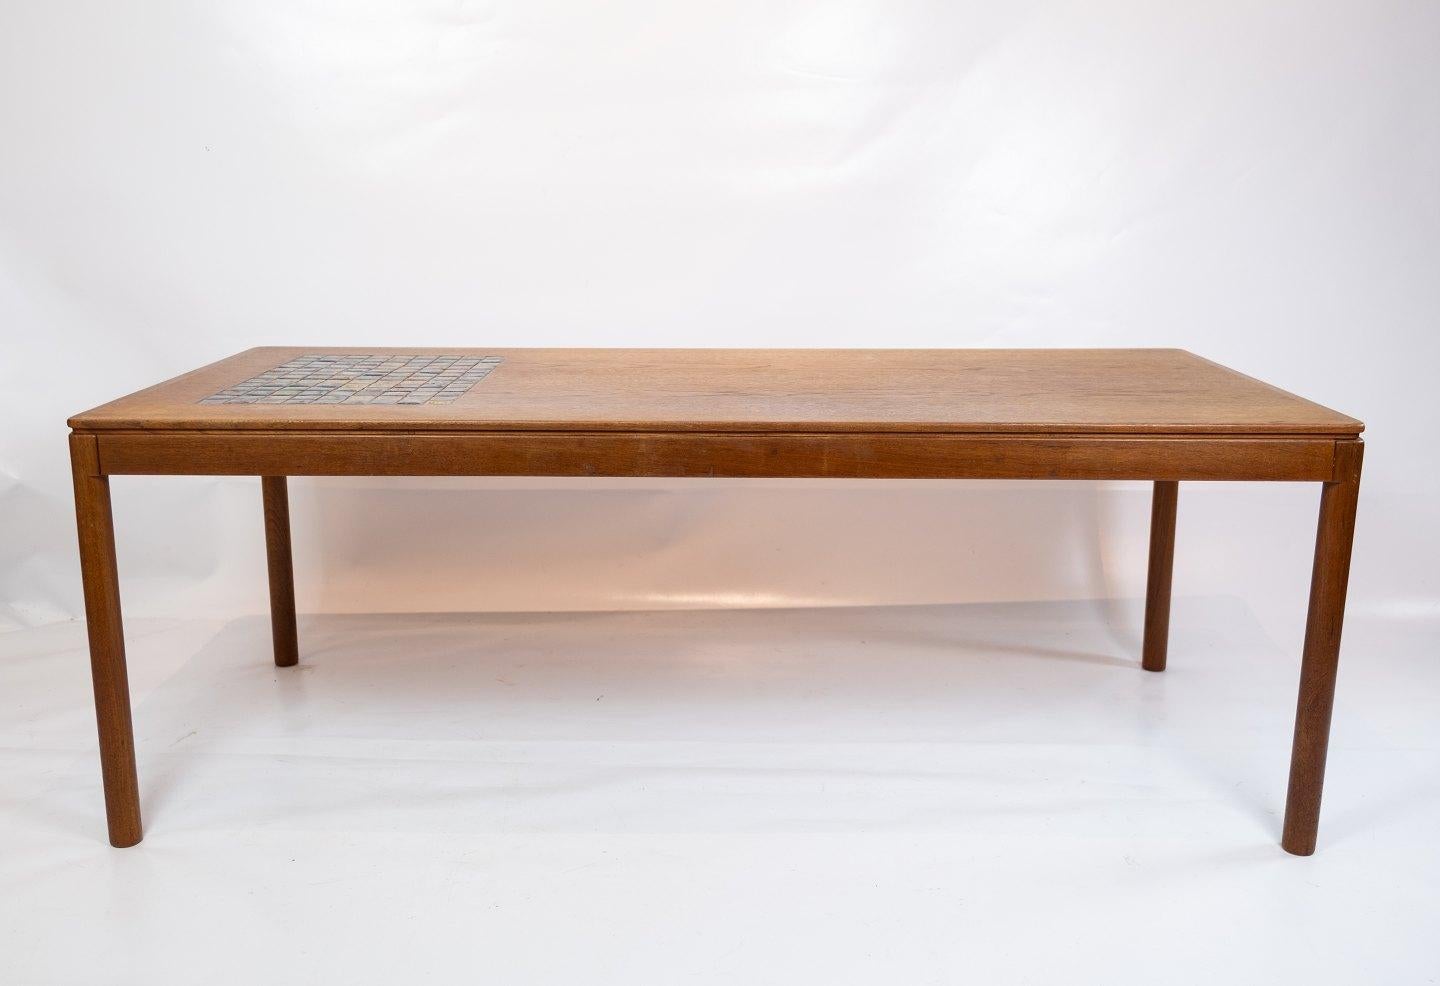 Coffee table in teak with brown ceramic tiles of Danish design from the 1960s. The table is in great vintage condition.
         
This coffee table, crafted in teak with brown ceramic tiles, embodies the essence of Danish design from the 1960s.